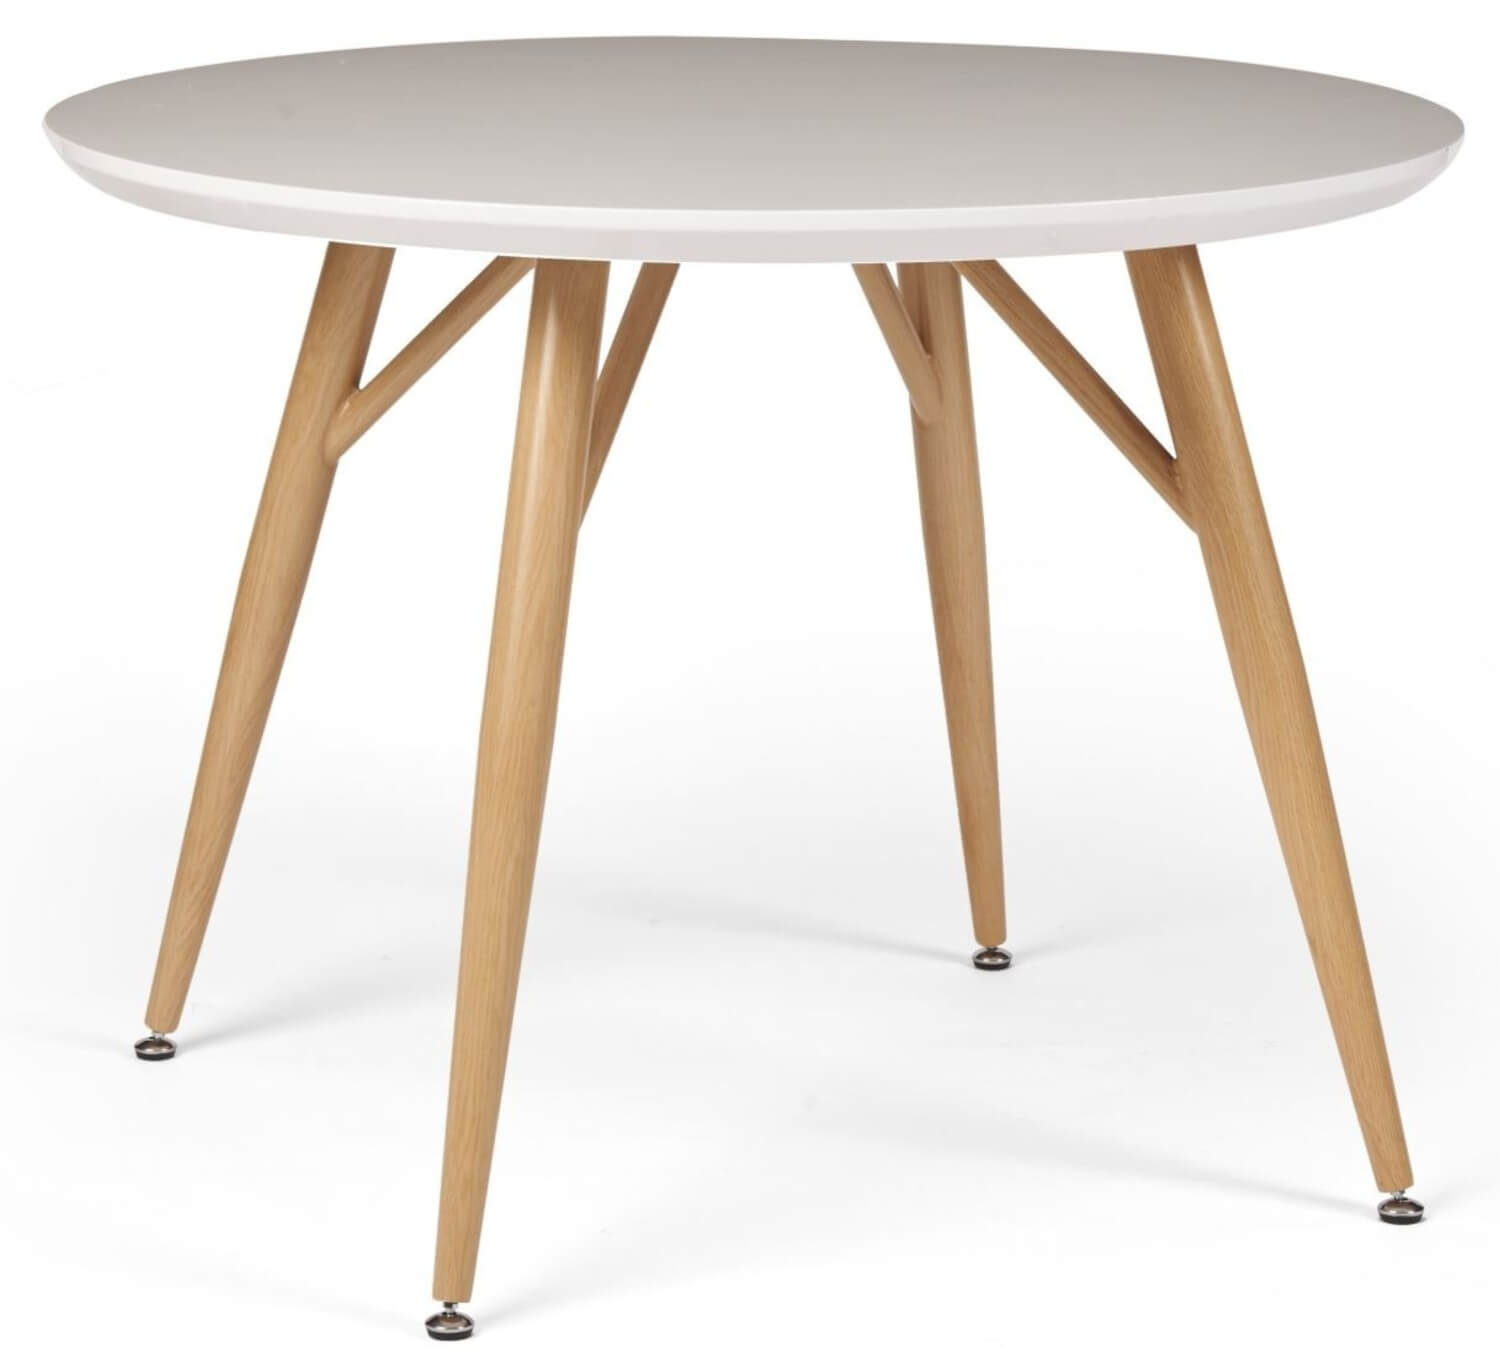 Showing image for Erica dining table - round